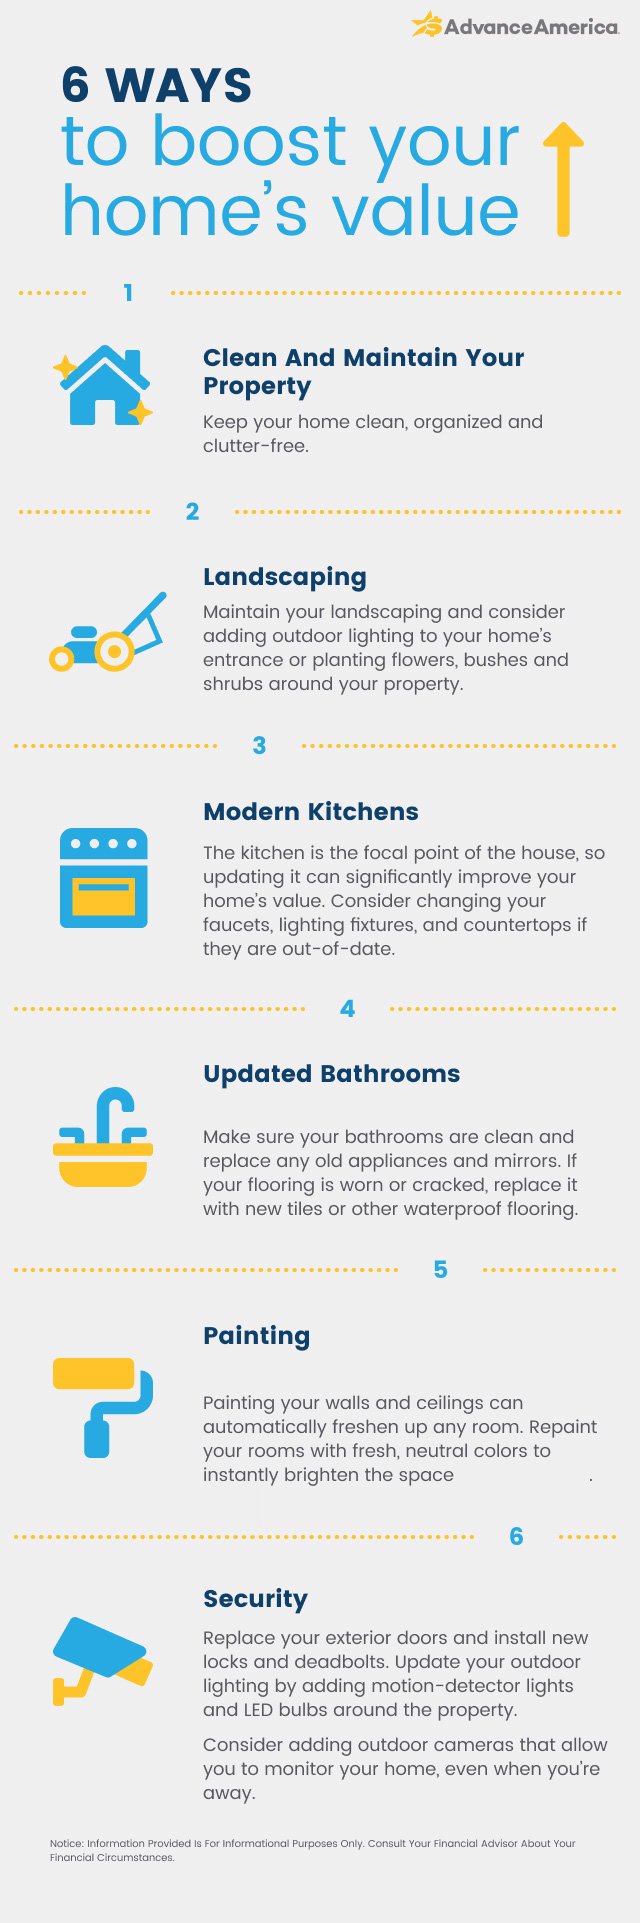 Ways to boost your home’s value